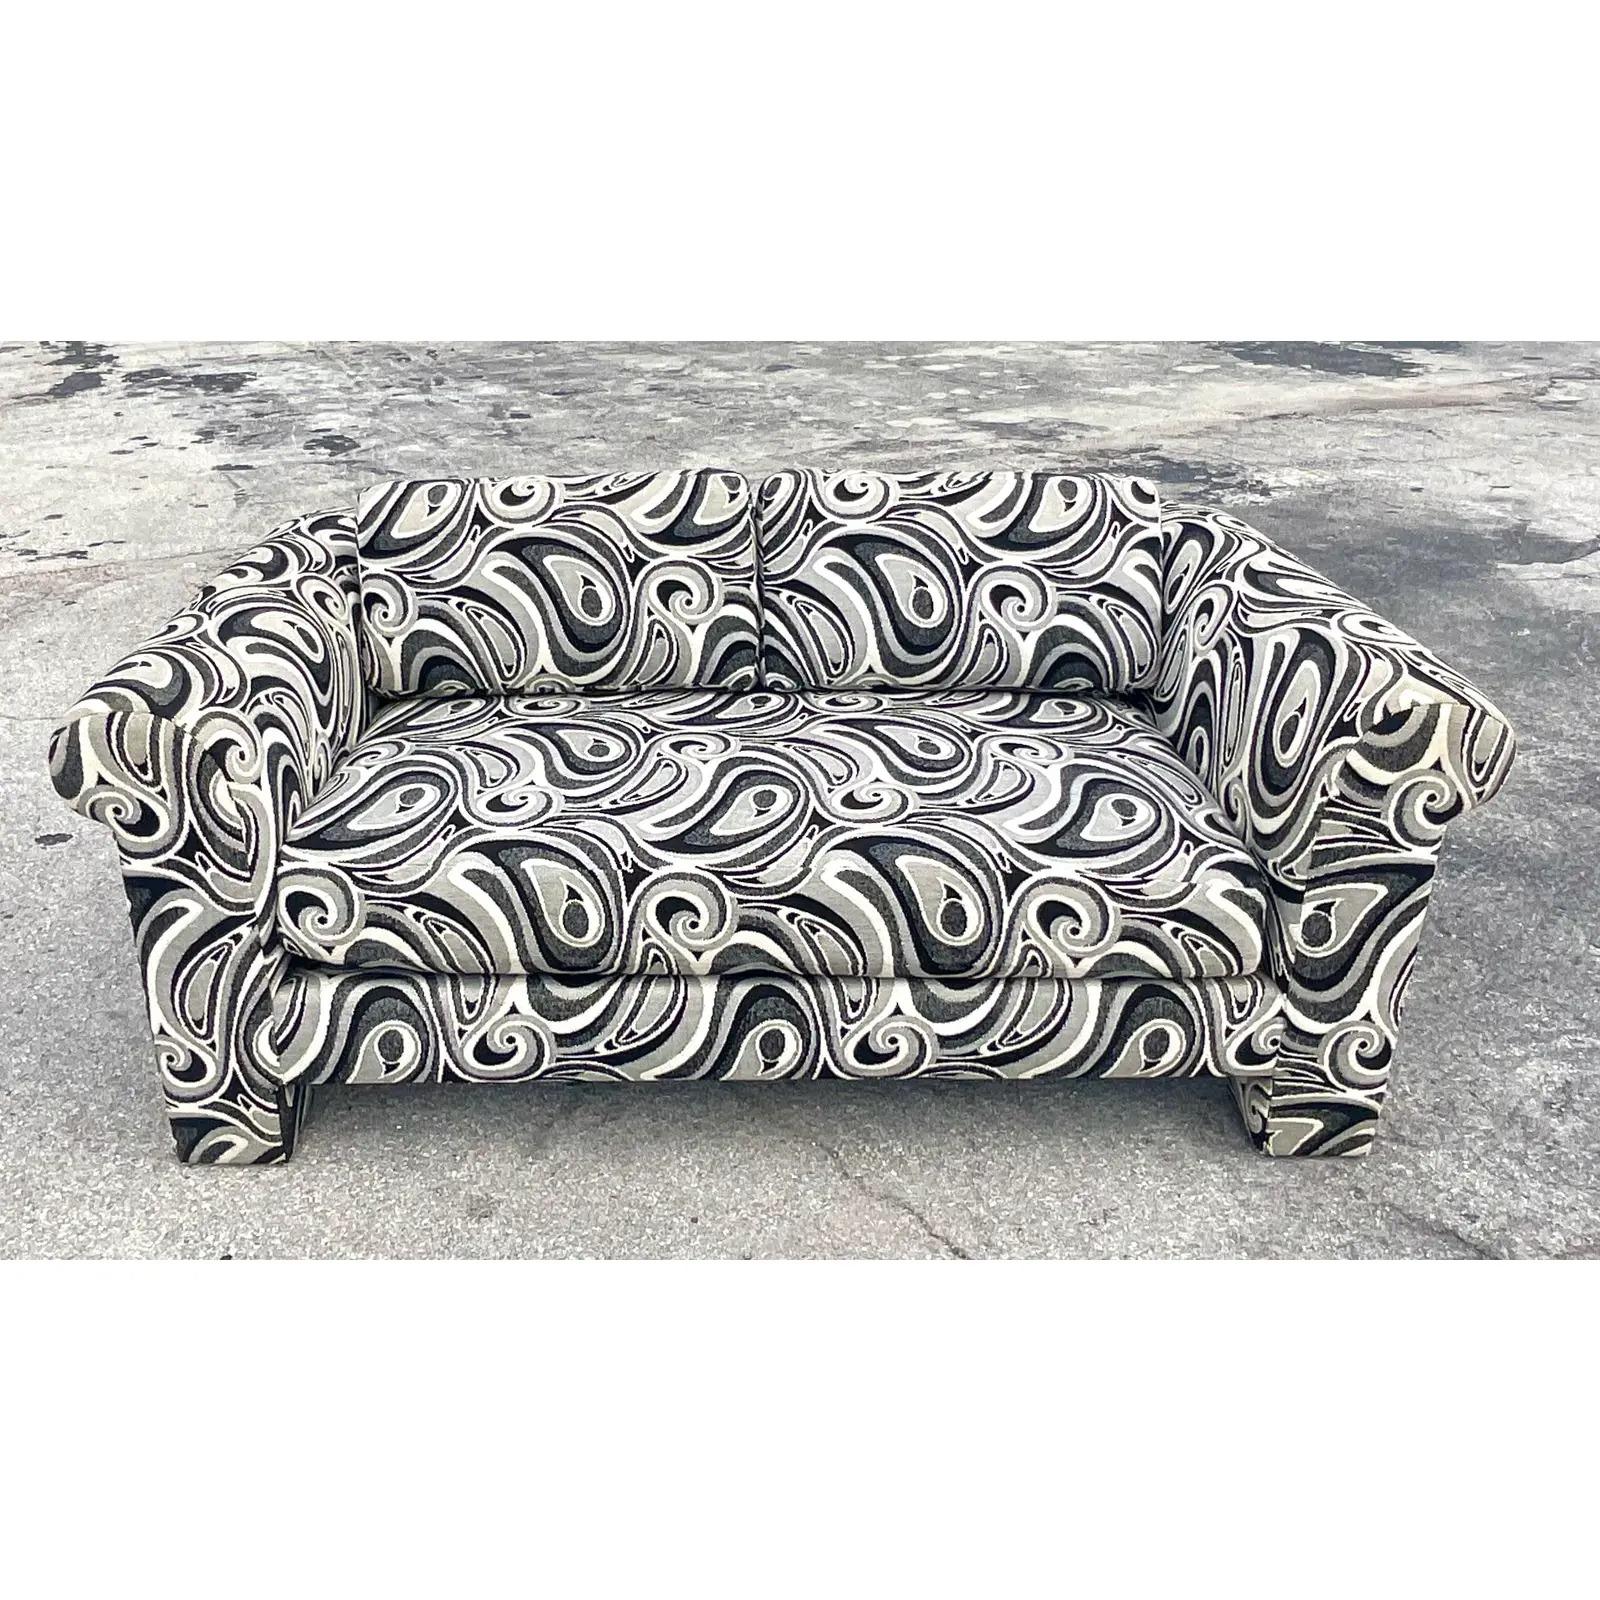 Fantastic vintage 80s Mod jacquard loveseat. Beautiful graphic print fabric on a chic high sides design. Made by the iconic Dreyfuss group, the maker of the iconic Kagan sofas. Two loveseats available if you prefer a set. Acquired from a Palm Beach